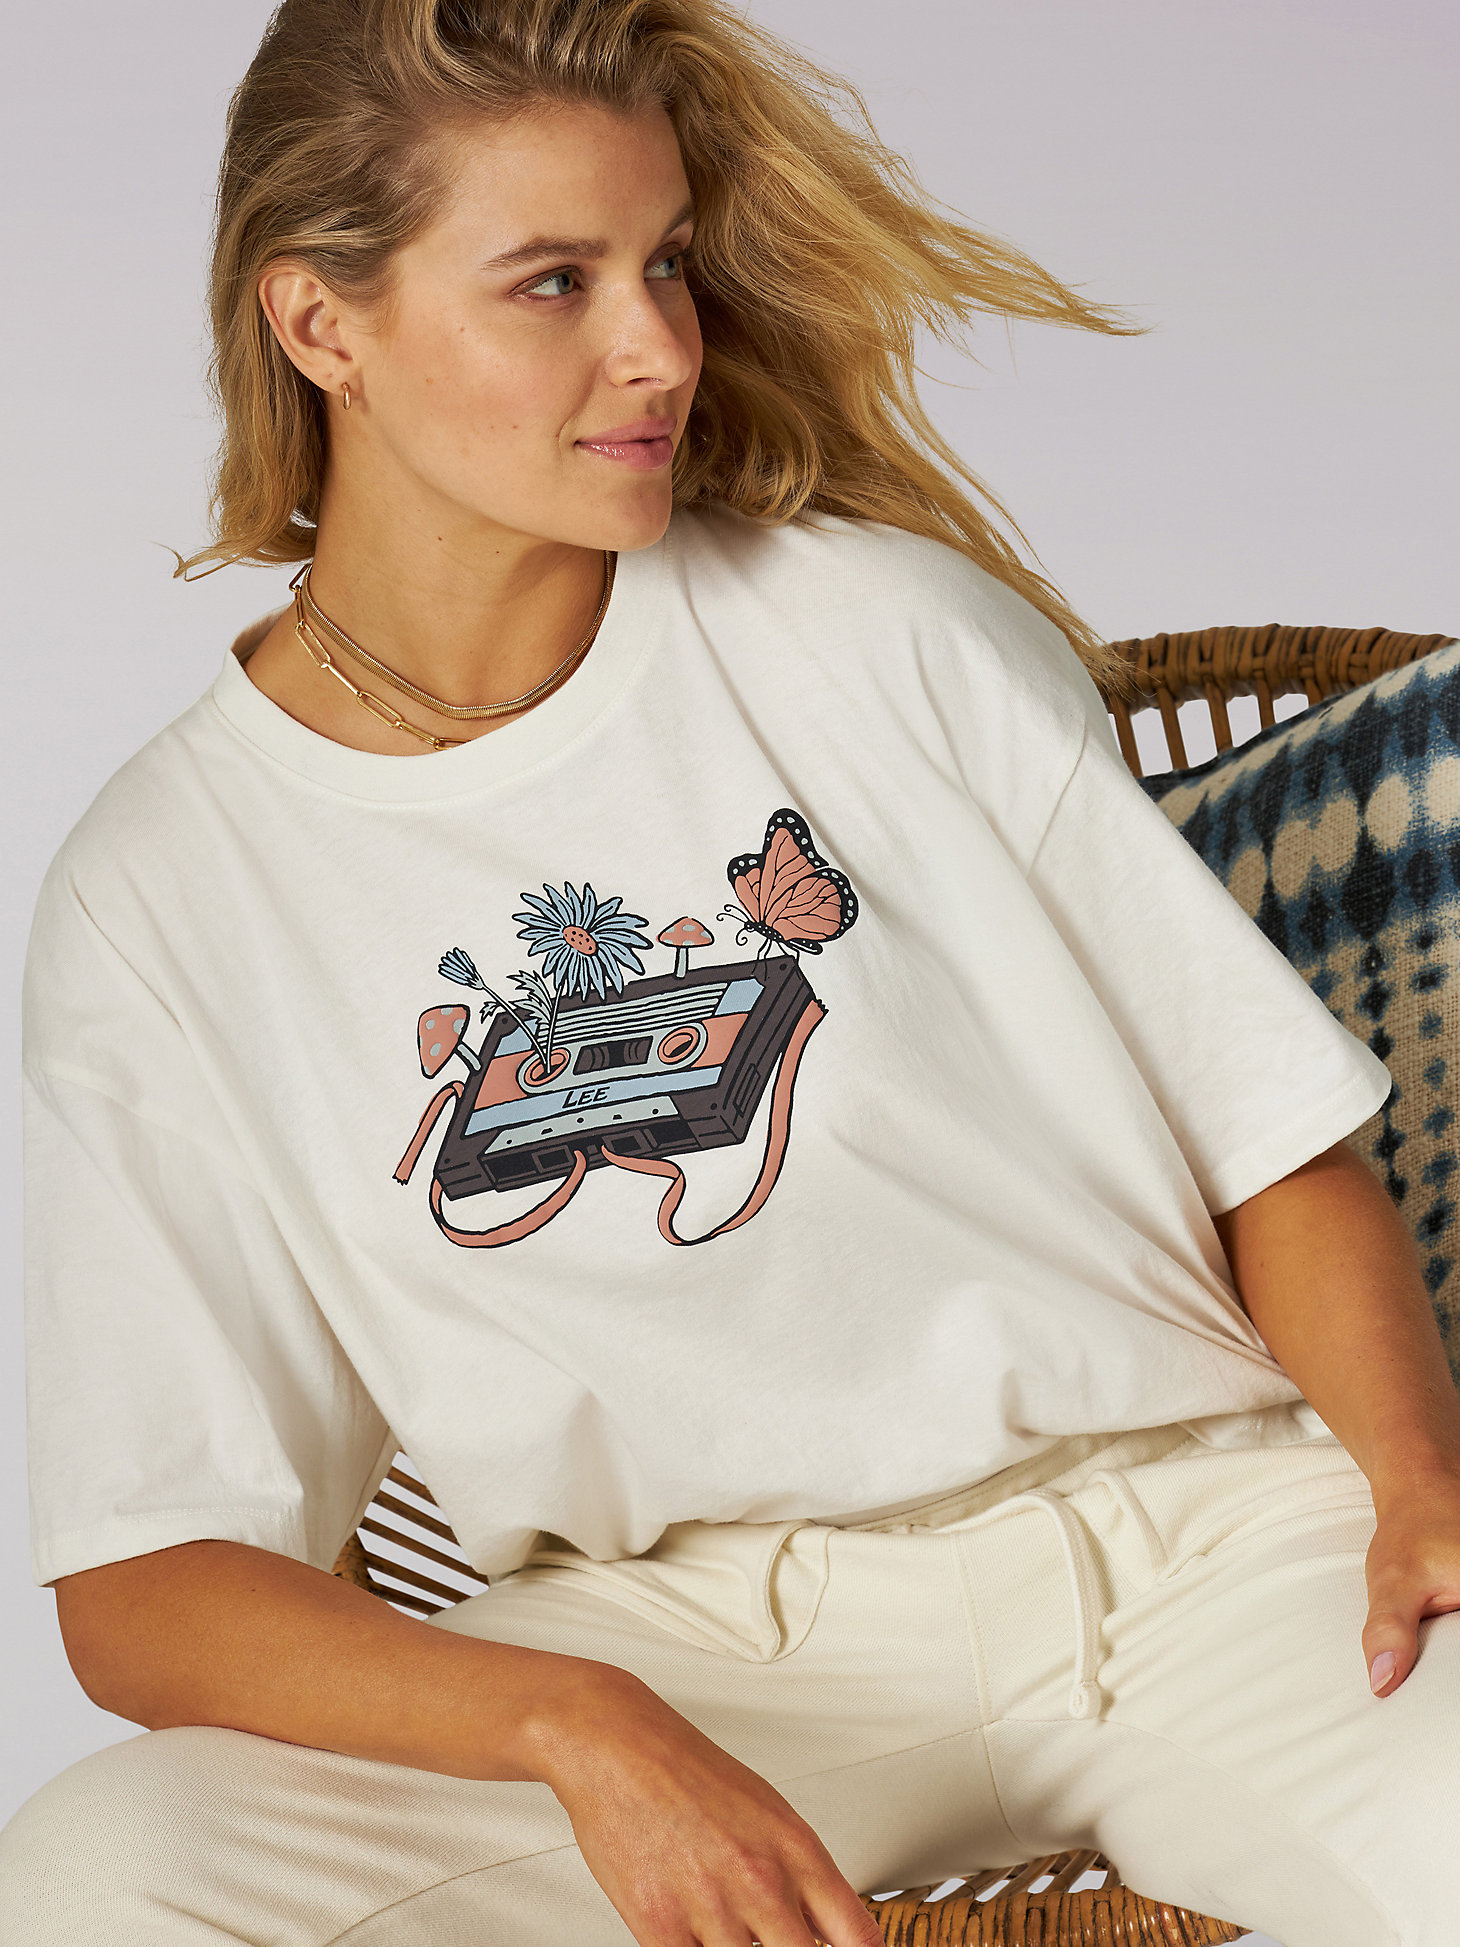 Women's Heritage Boxy Crop Spring Cassette Graphic Tee in Tofu alternative view 5